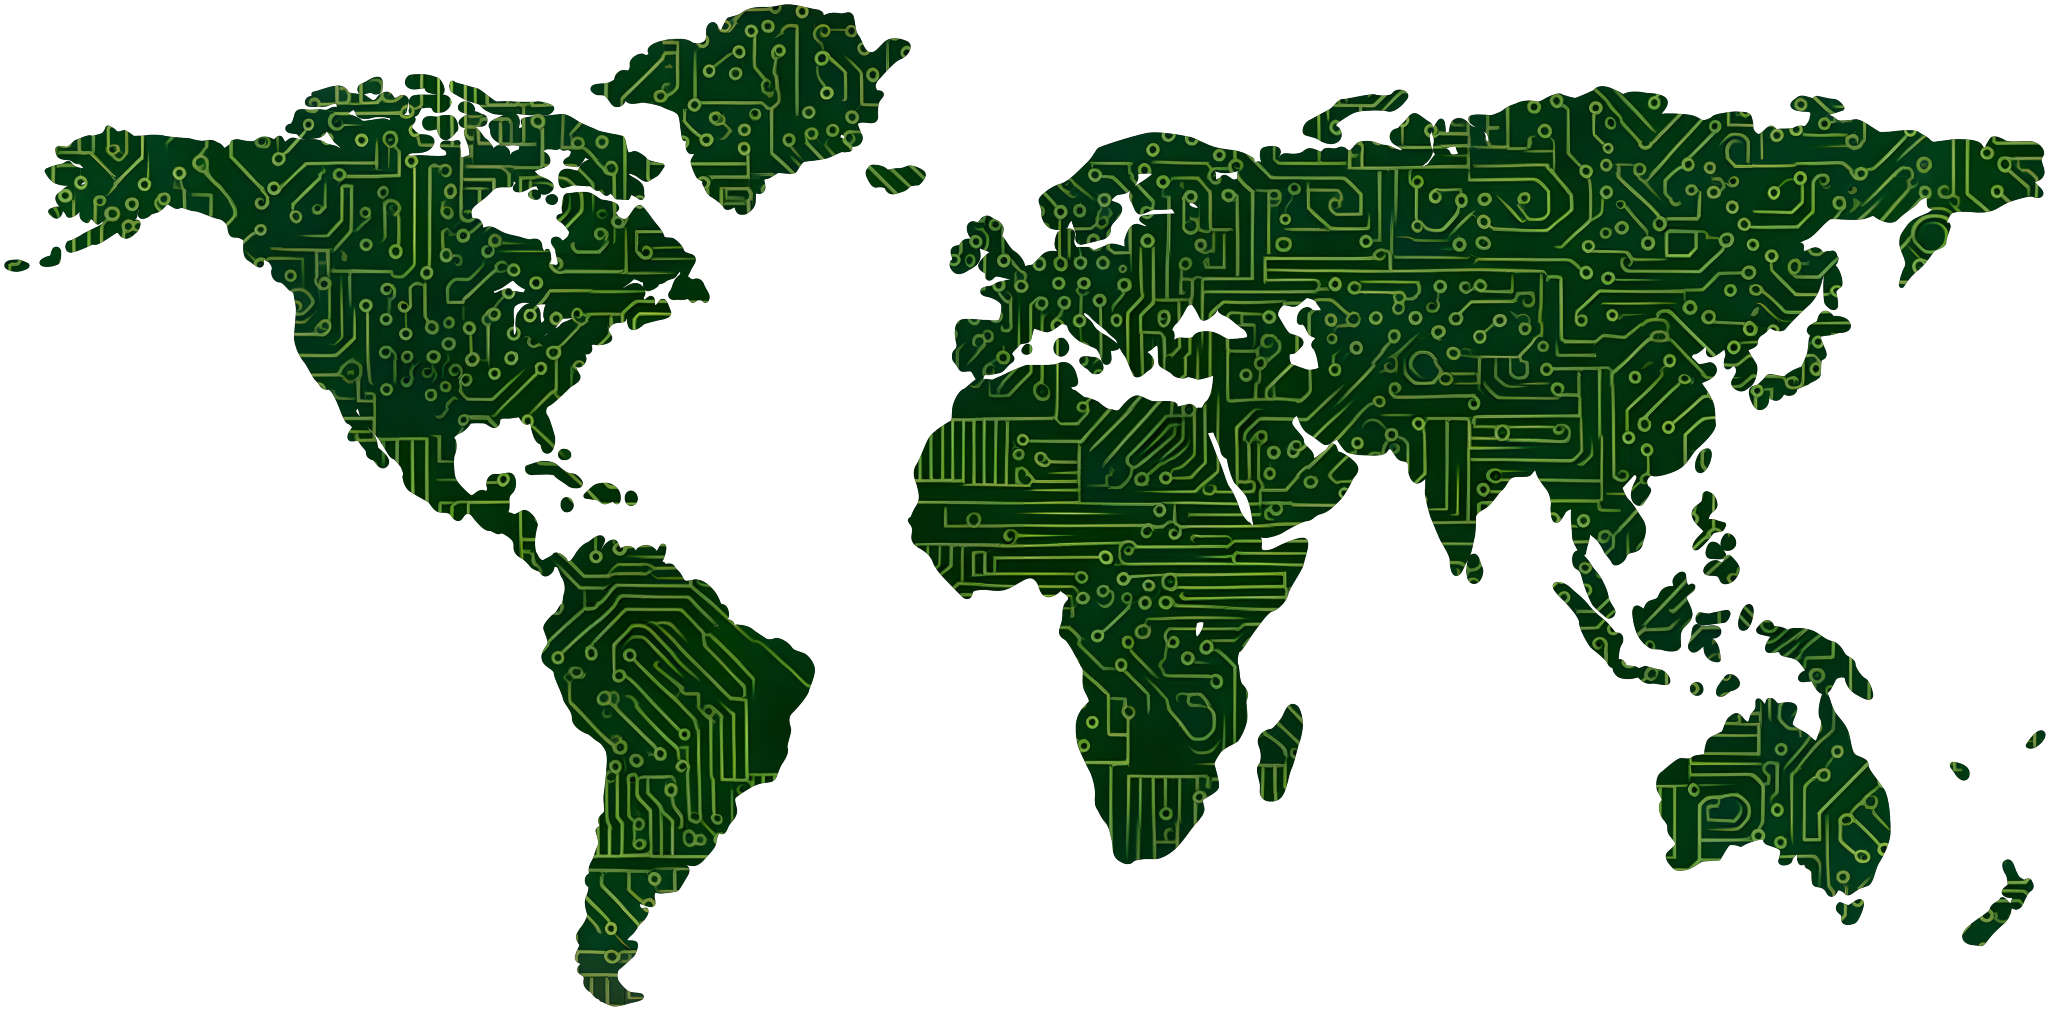 A World Map Made of Chip Circuit